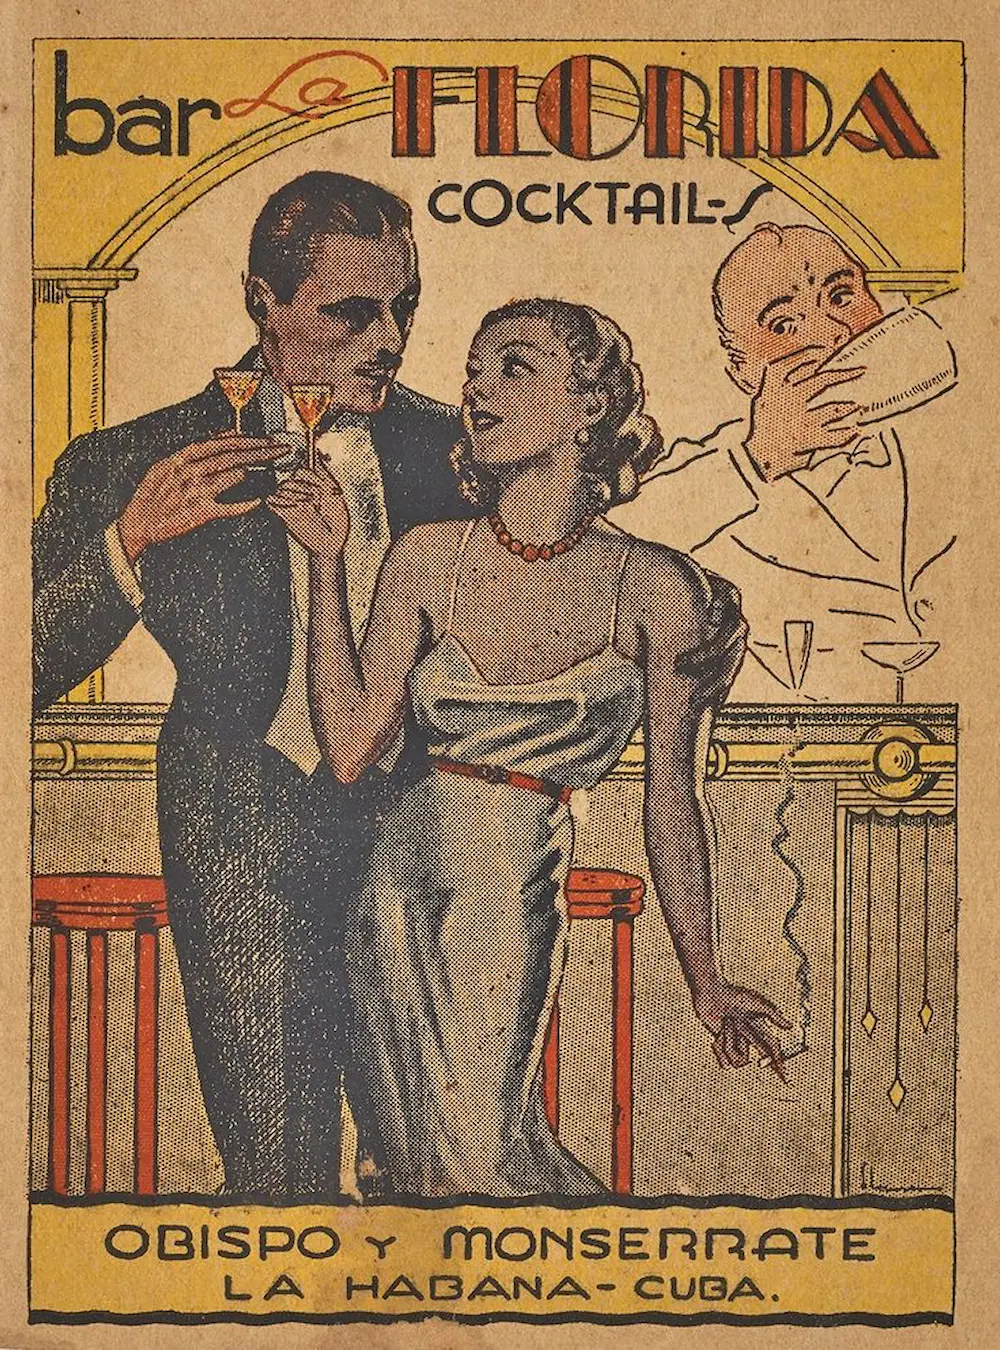 Vintage poster of a mixologist and couple drinking cocktails from a pop up bar